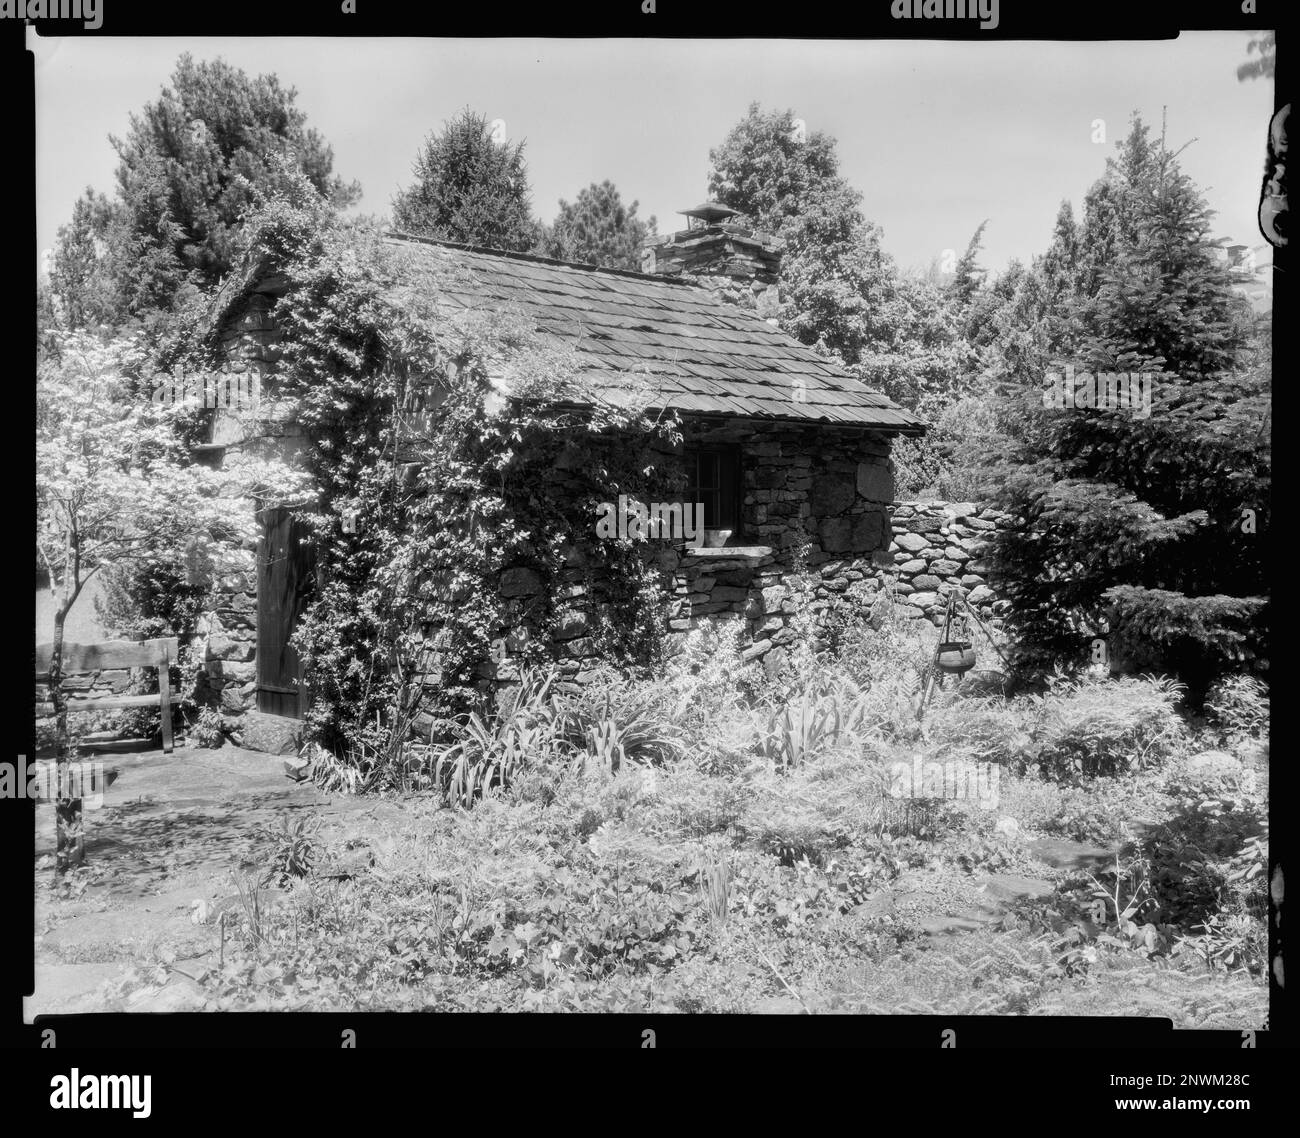 Rose Hill, Greenwood, Albemarle County, Virginia. Carnegie Survey of the Architecture of the South. United States  Virginia  Albemarle County  Greenwood, Stone buildings, Gardens. Stock Photo